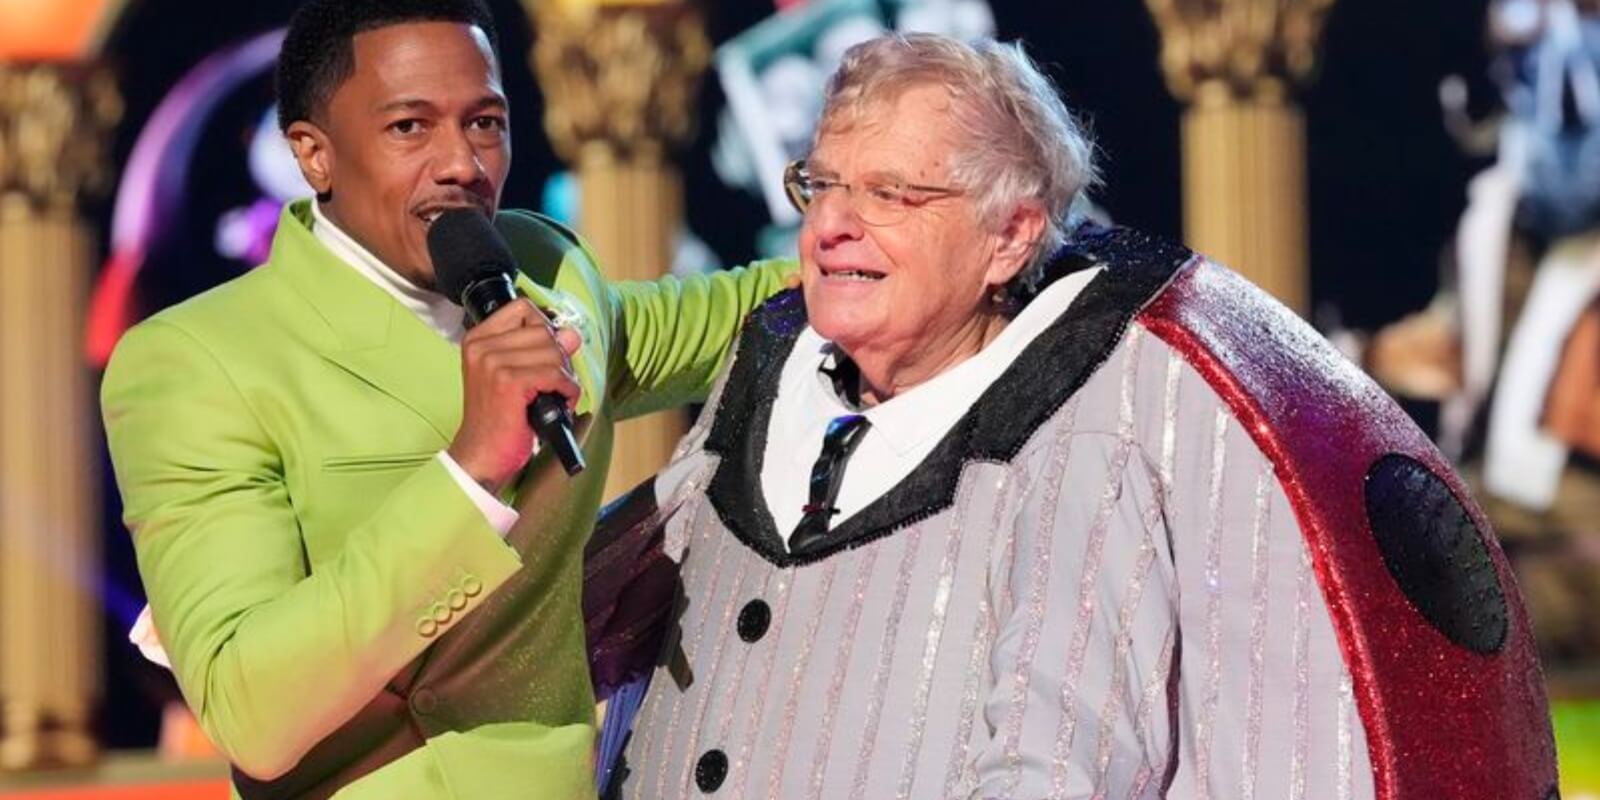 Nick Cannon and Jerry Springer on season 8 of 'The Masked Singer.'